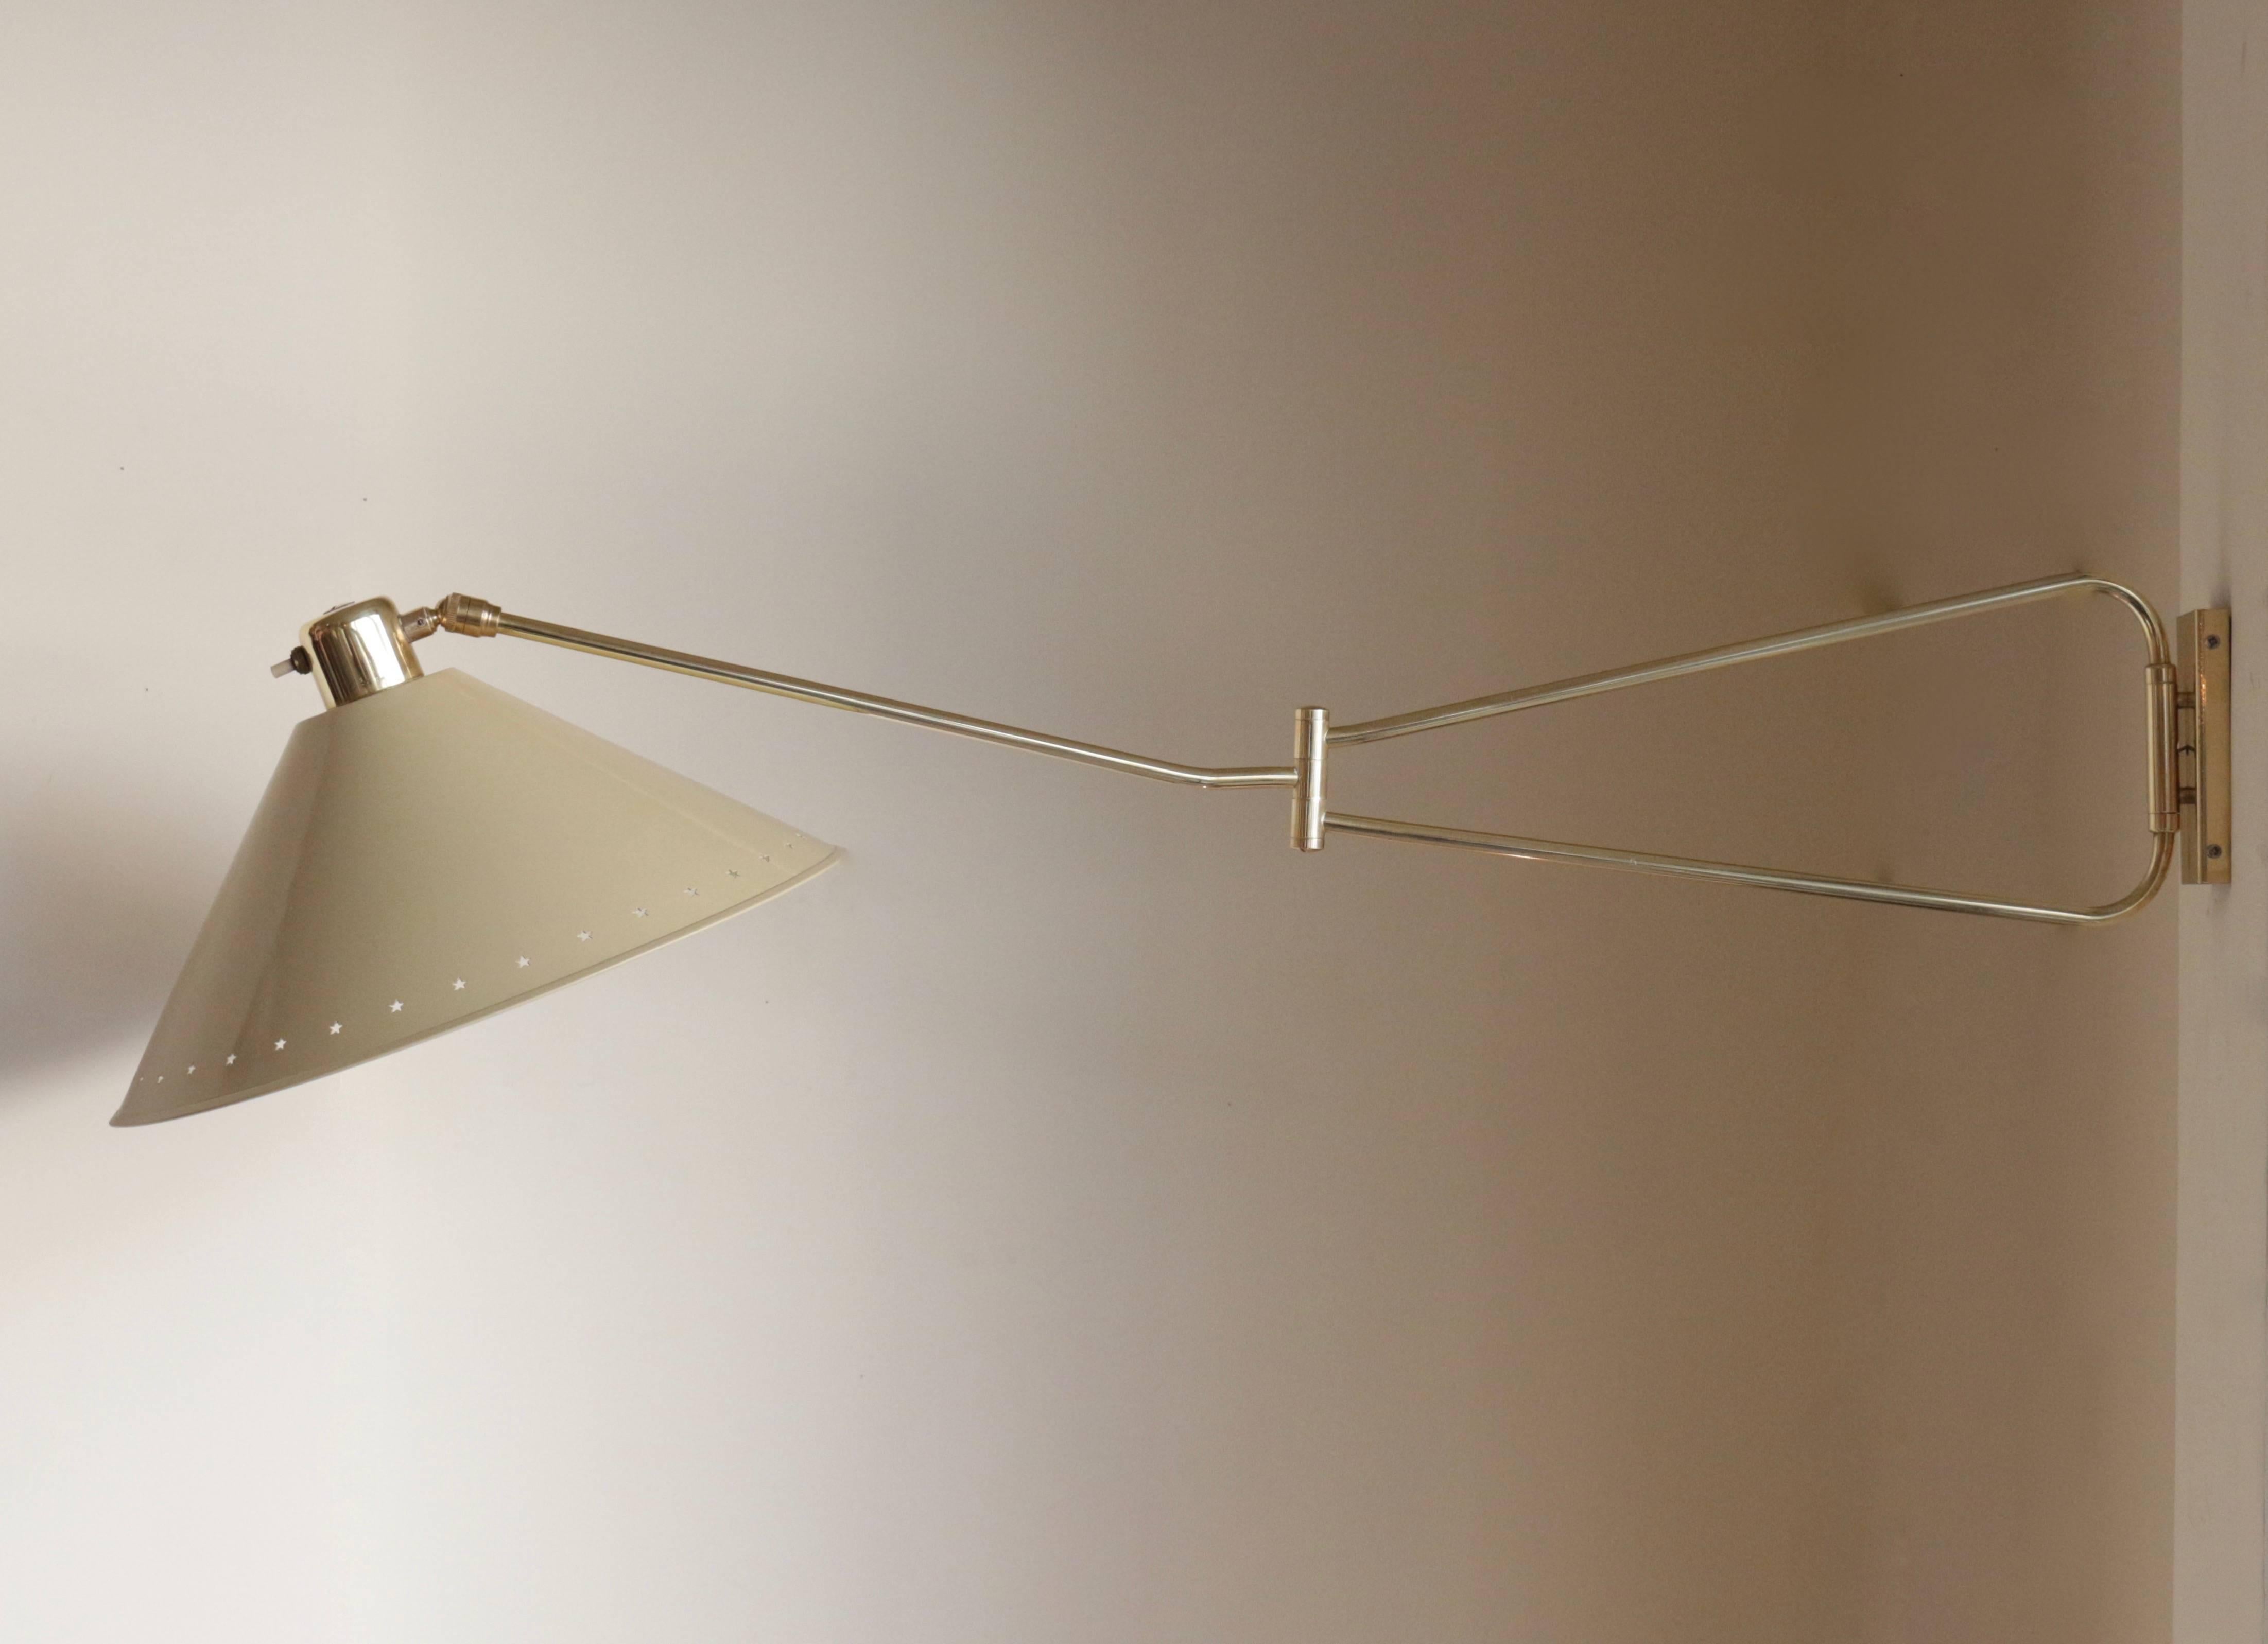 1950s articulated wall light by Lunel.

The long brass arm has two articulations. It could be folded in tow or fully extended. The conical lampshade is off-white lacquered.
The power switch is located on the lampshade top.

One bulb.